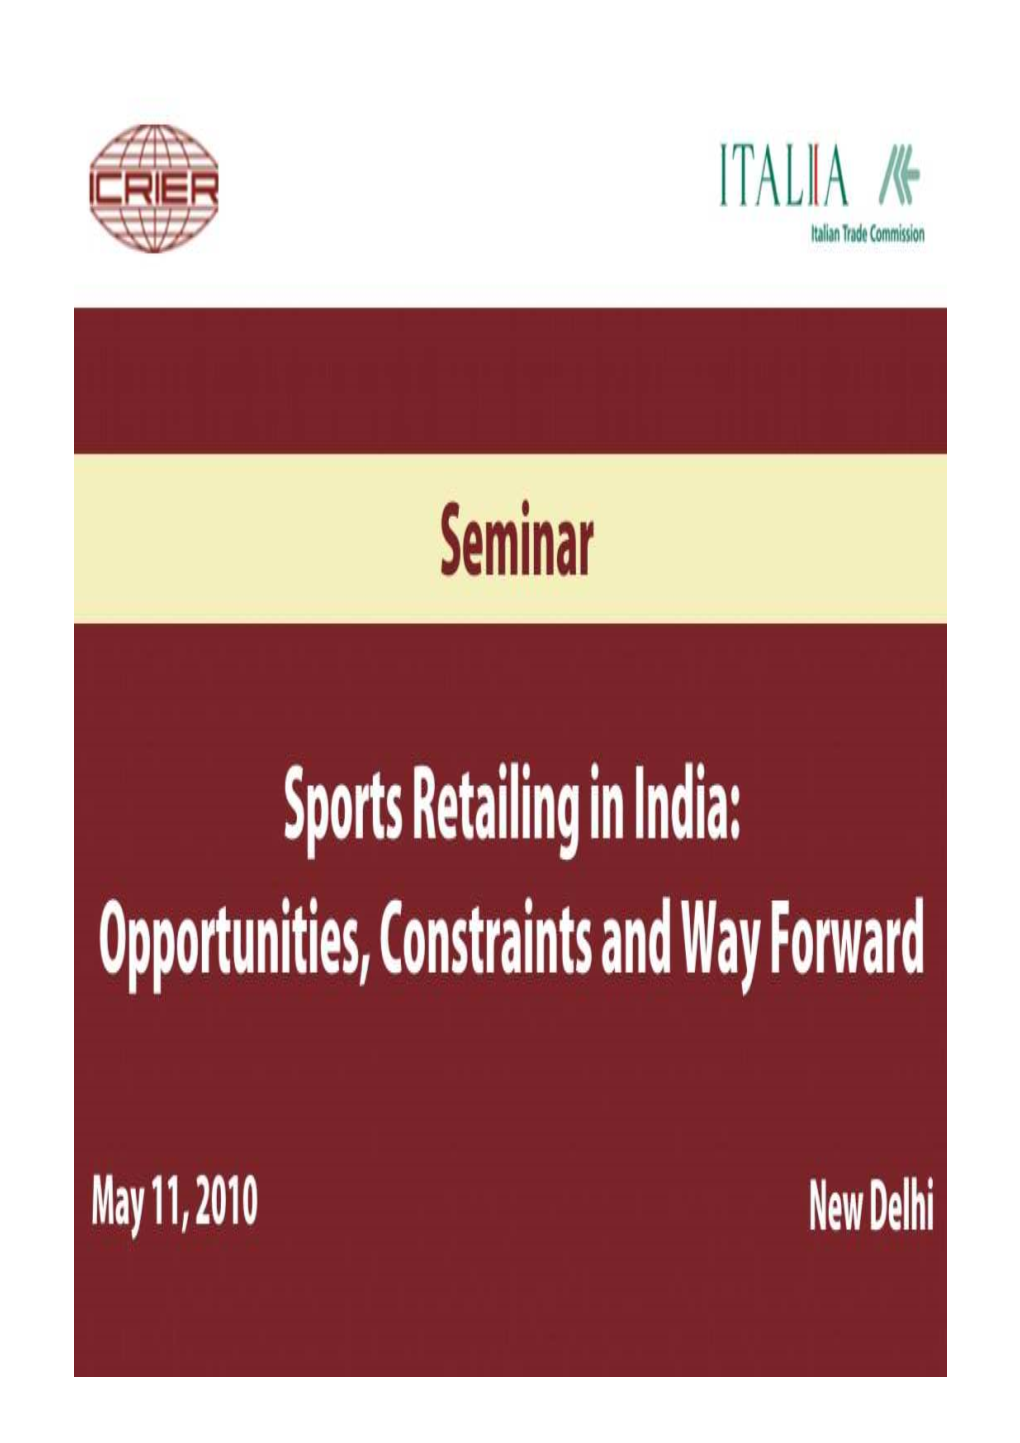 Sports Retailing in India: Opportunities, Constraints and Way Forward